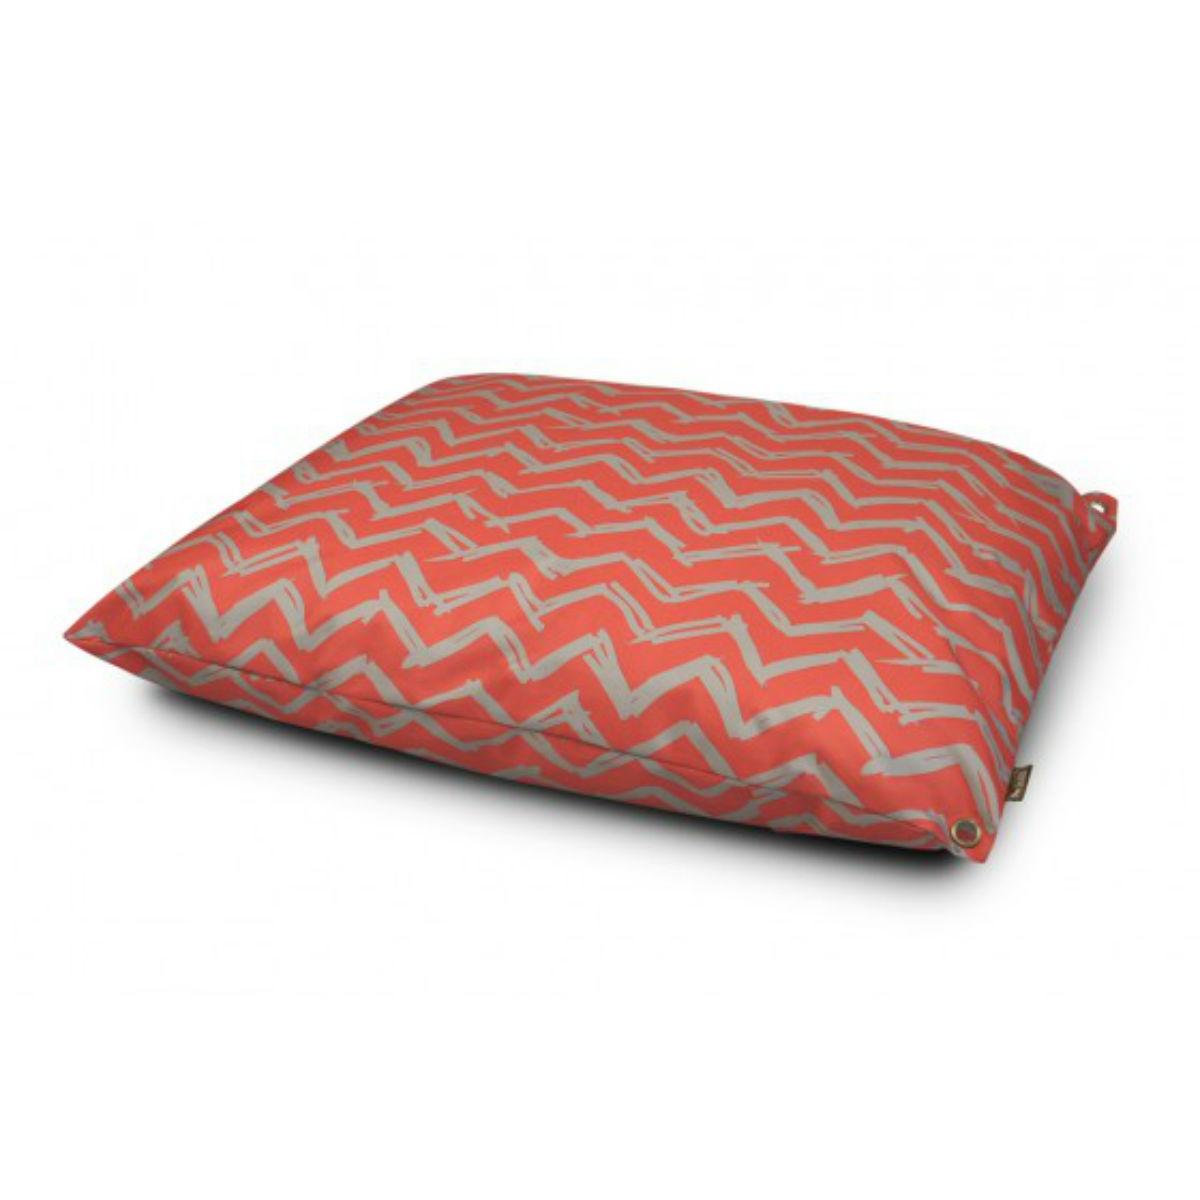 P.L.A.Y. Chevron Outdoor Dog Bed - Barn Red